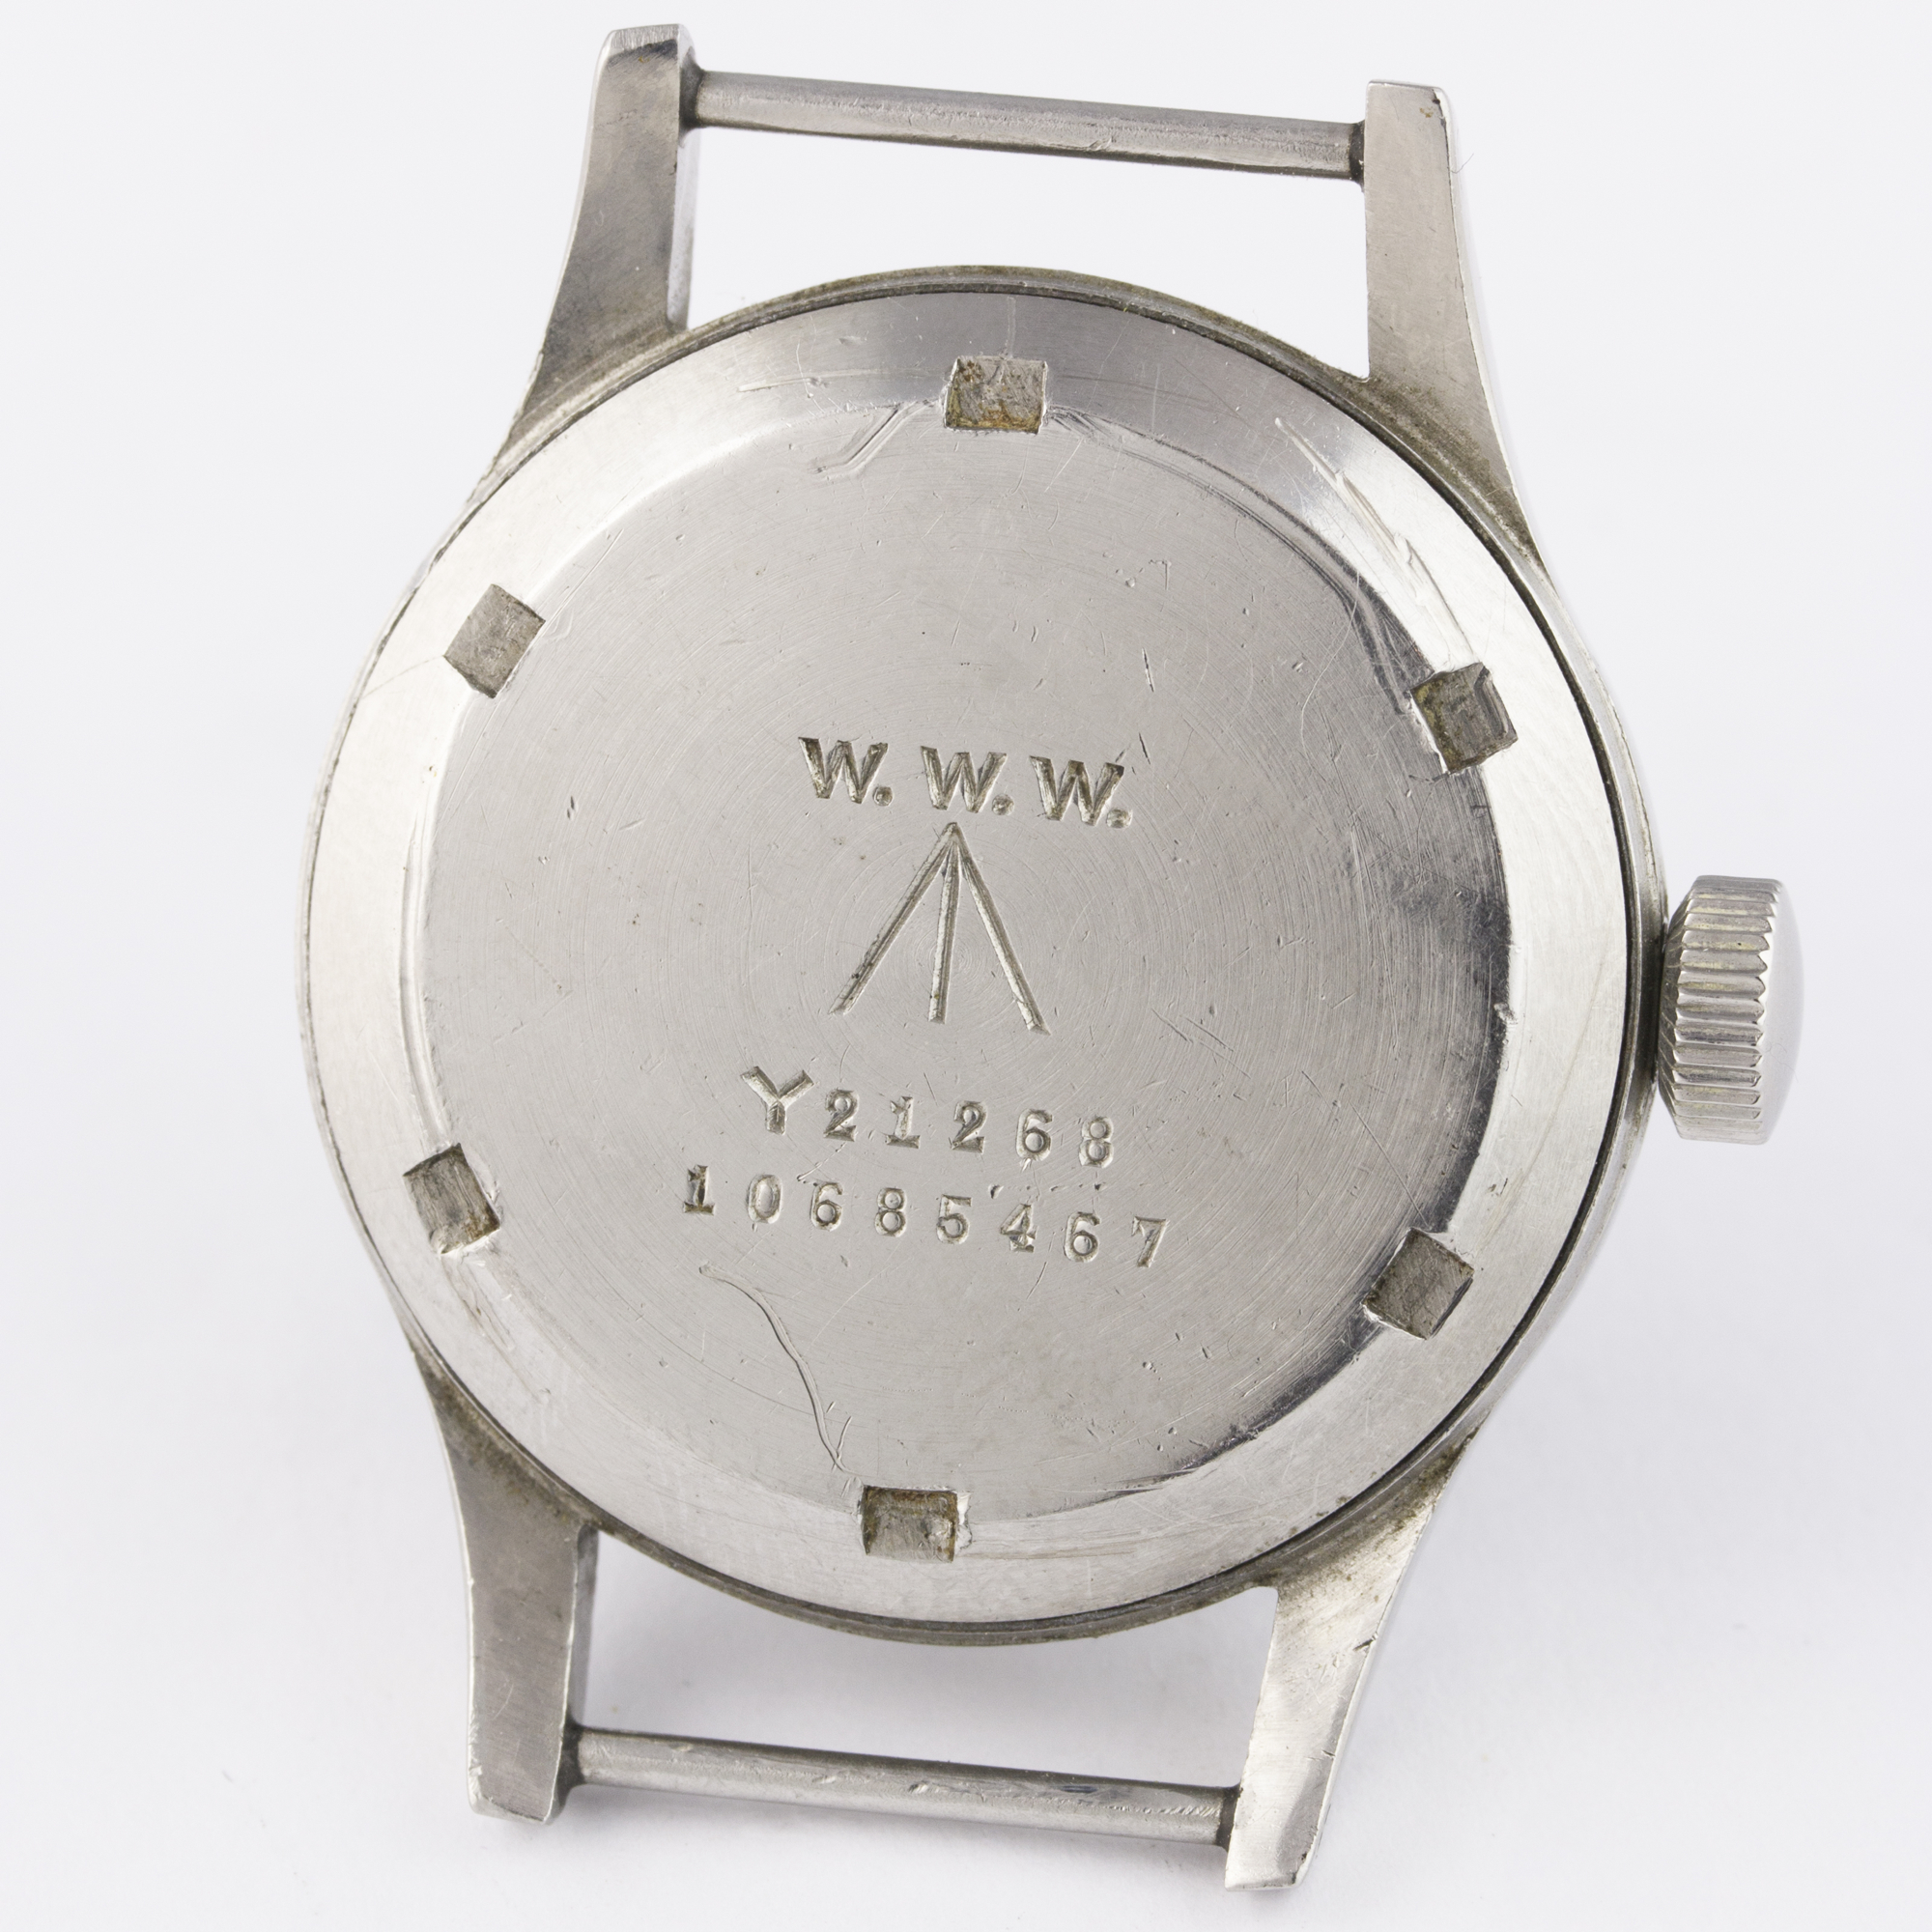 A GENTLEMAN'S STAINLESS STEEL BRITISH MILITARY OMEGA W.W.W. WRIST WATCH CIRCA 1947, PART OF THE " - Image 6 of 8